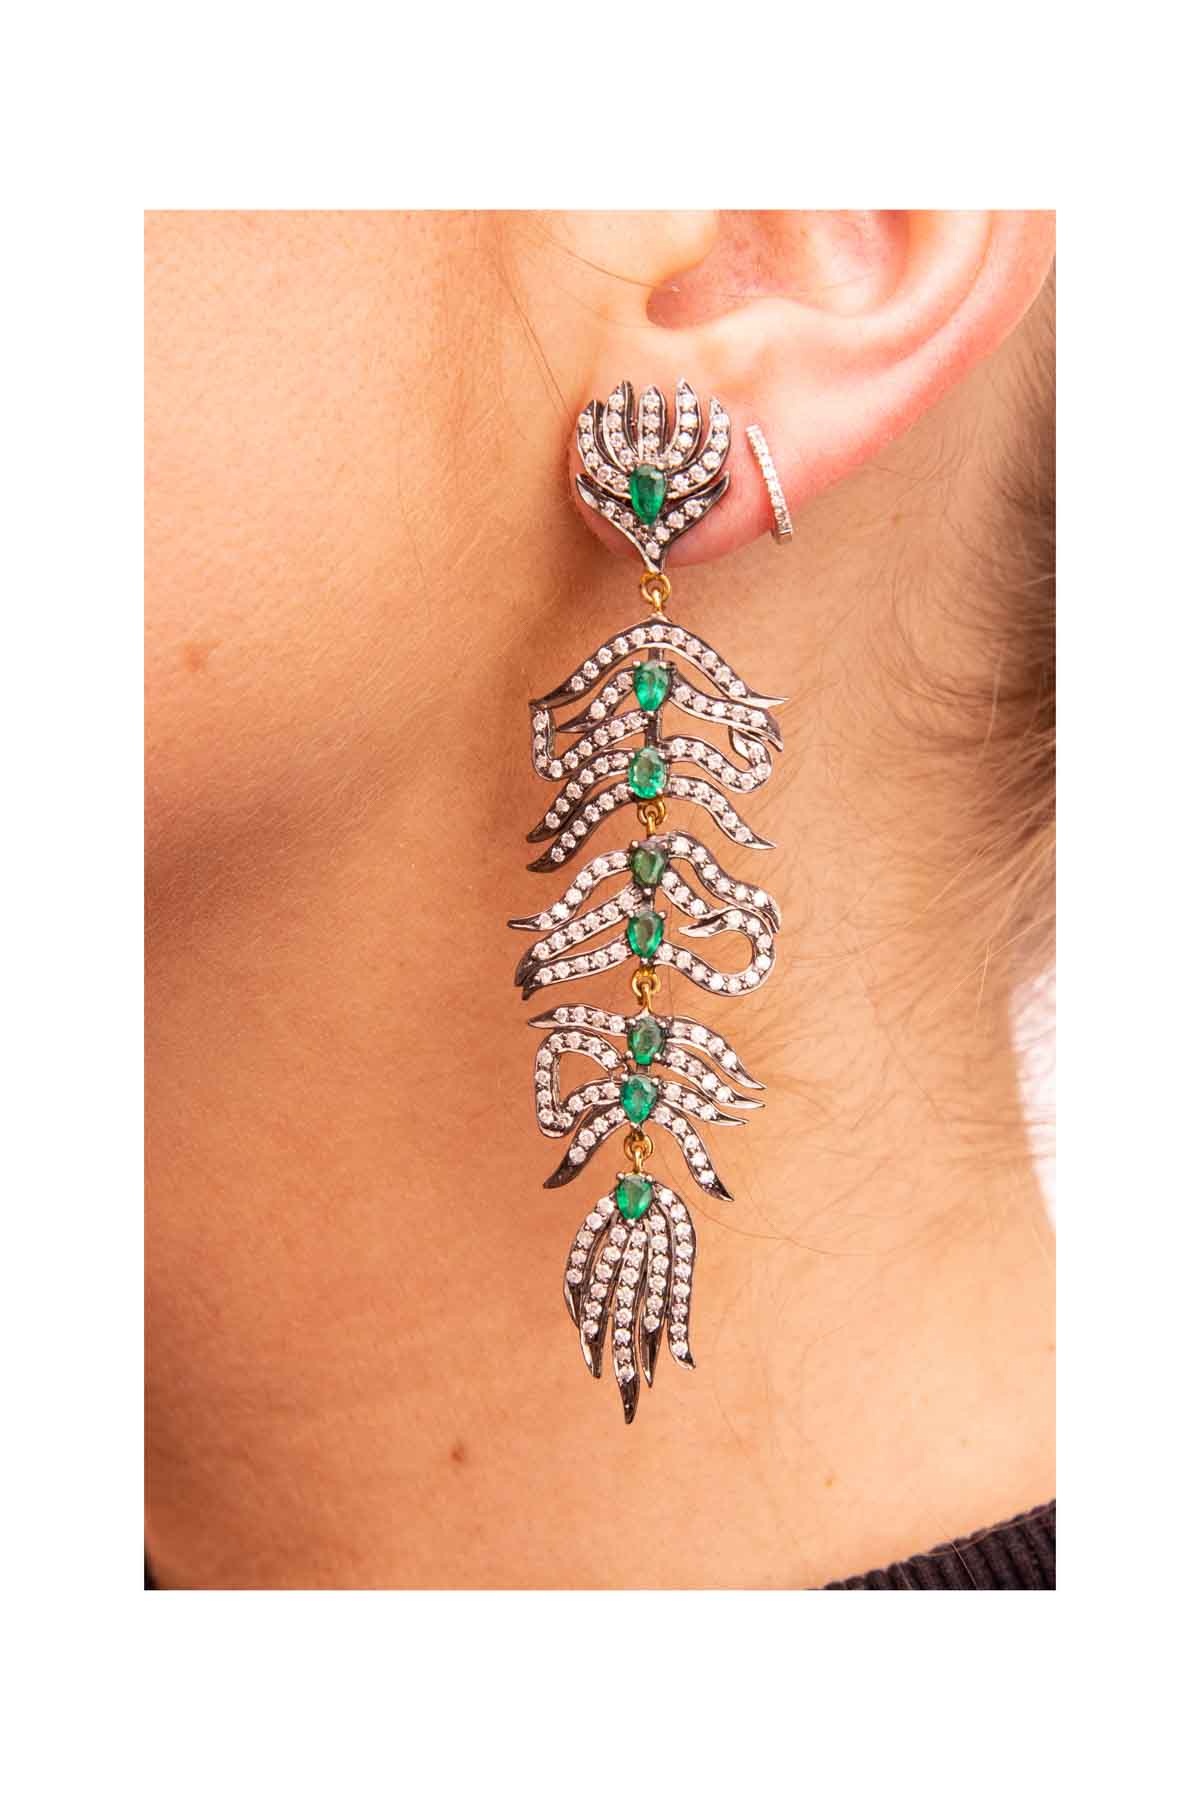 Diamond Feather Earrings with Emerald Inset